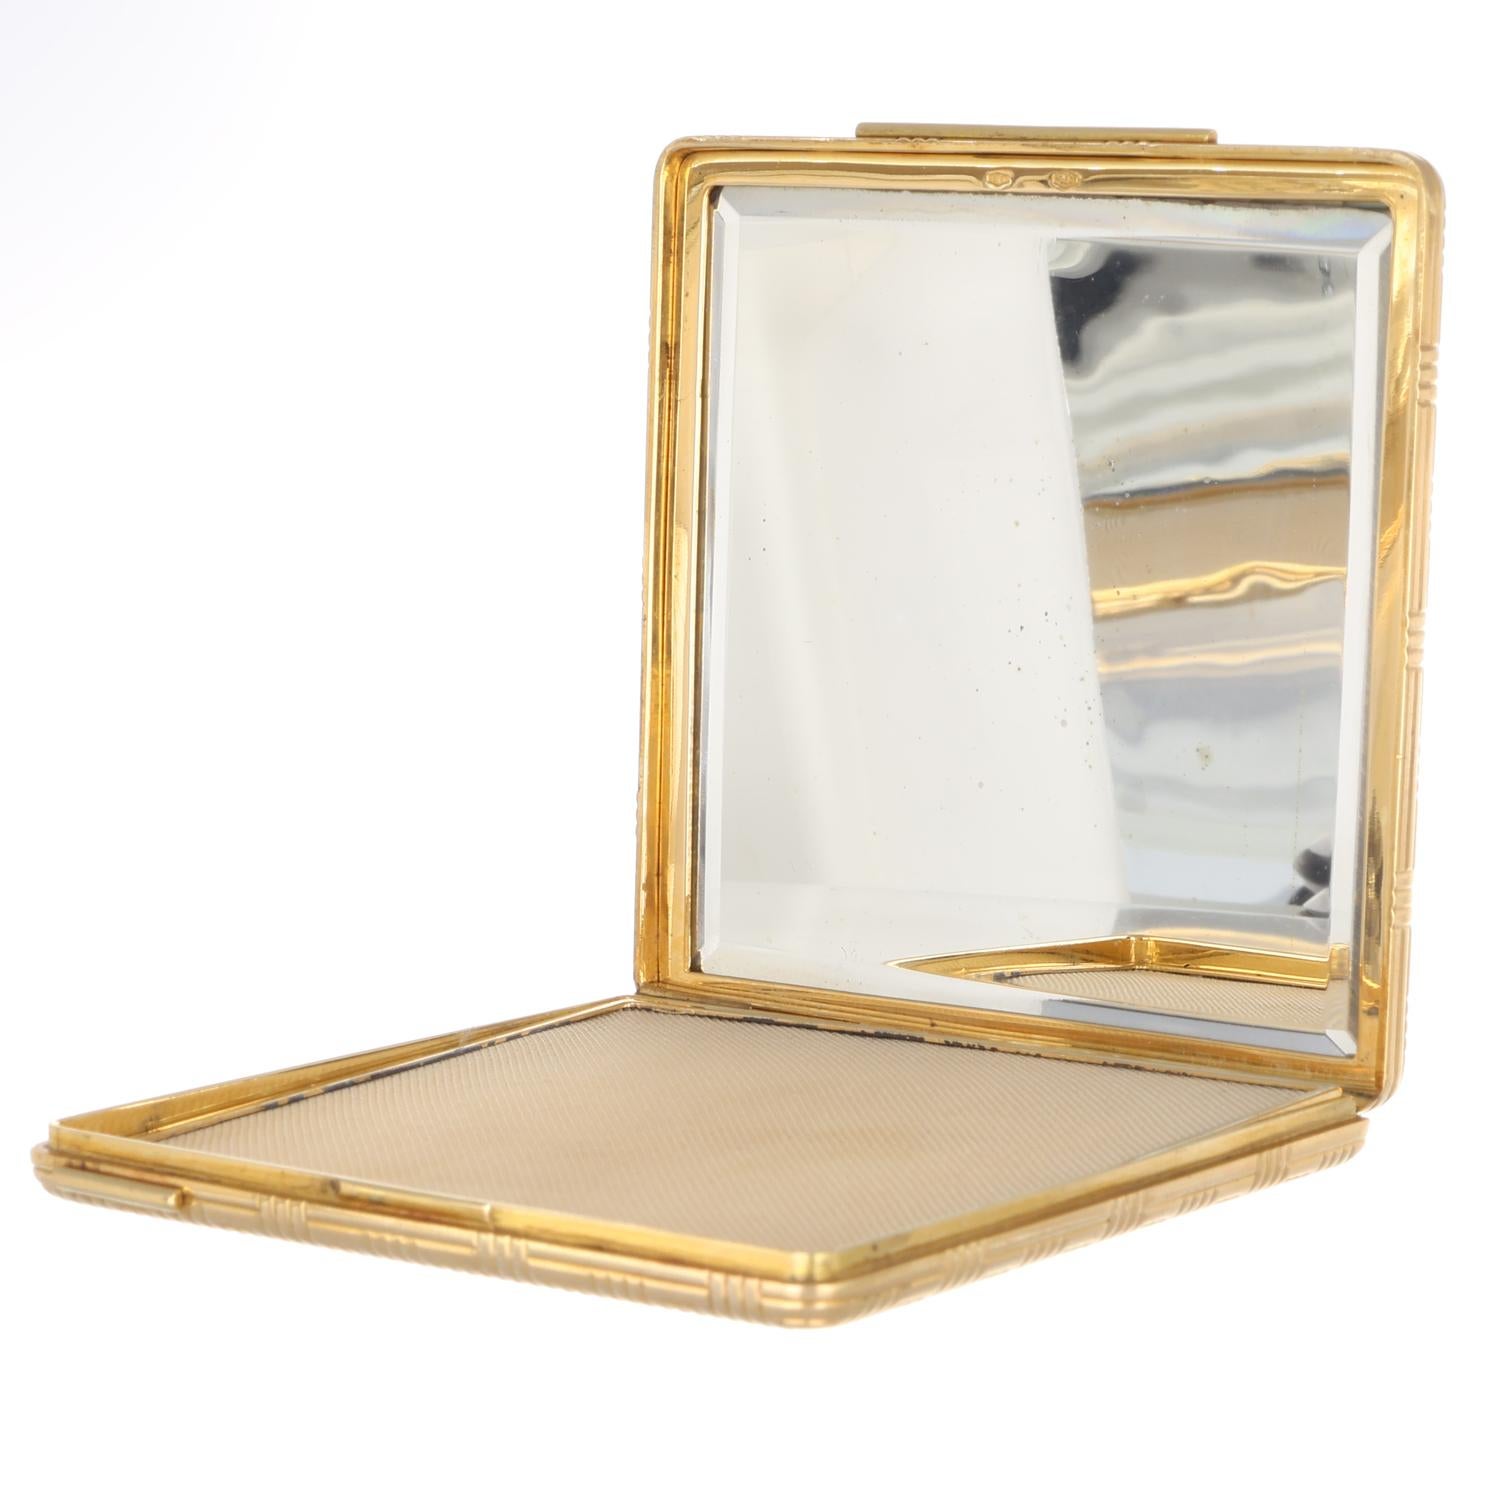 Women's or Men's 18Kt Gold Rare Compact Powder Box - Made in Italy 1970 circa - Geometric Pattern For Sale